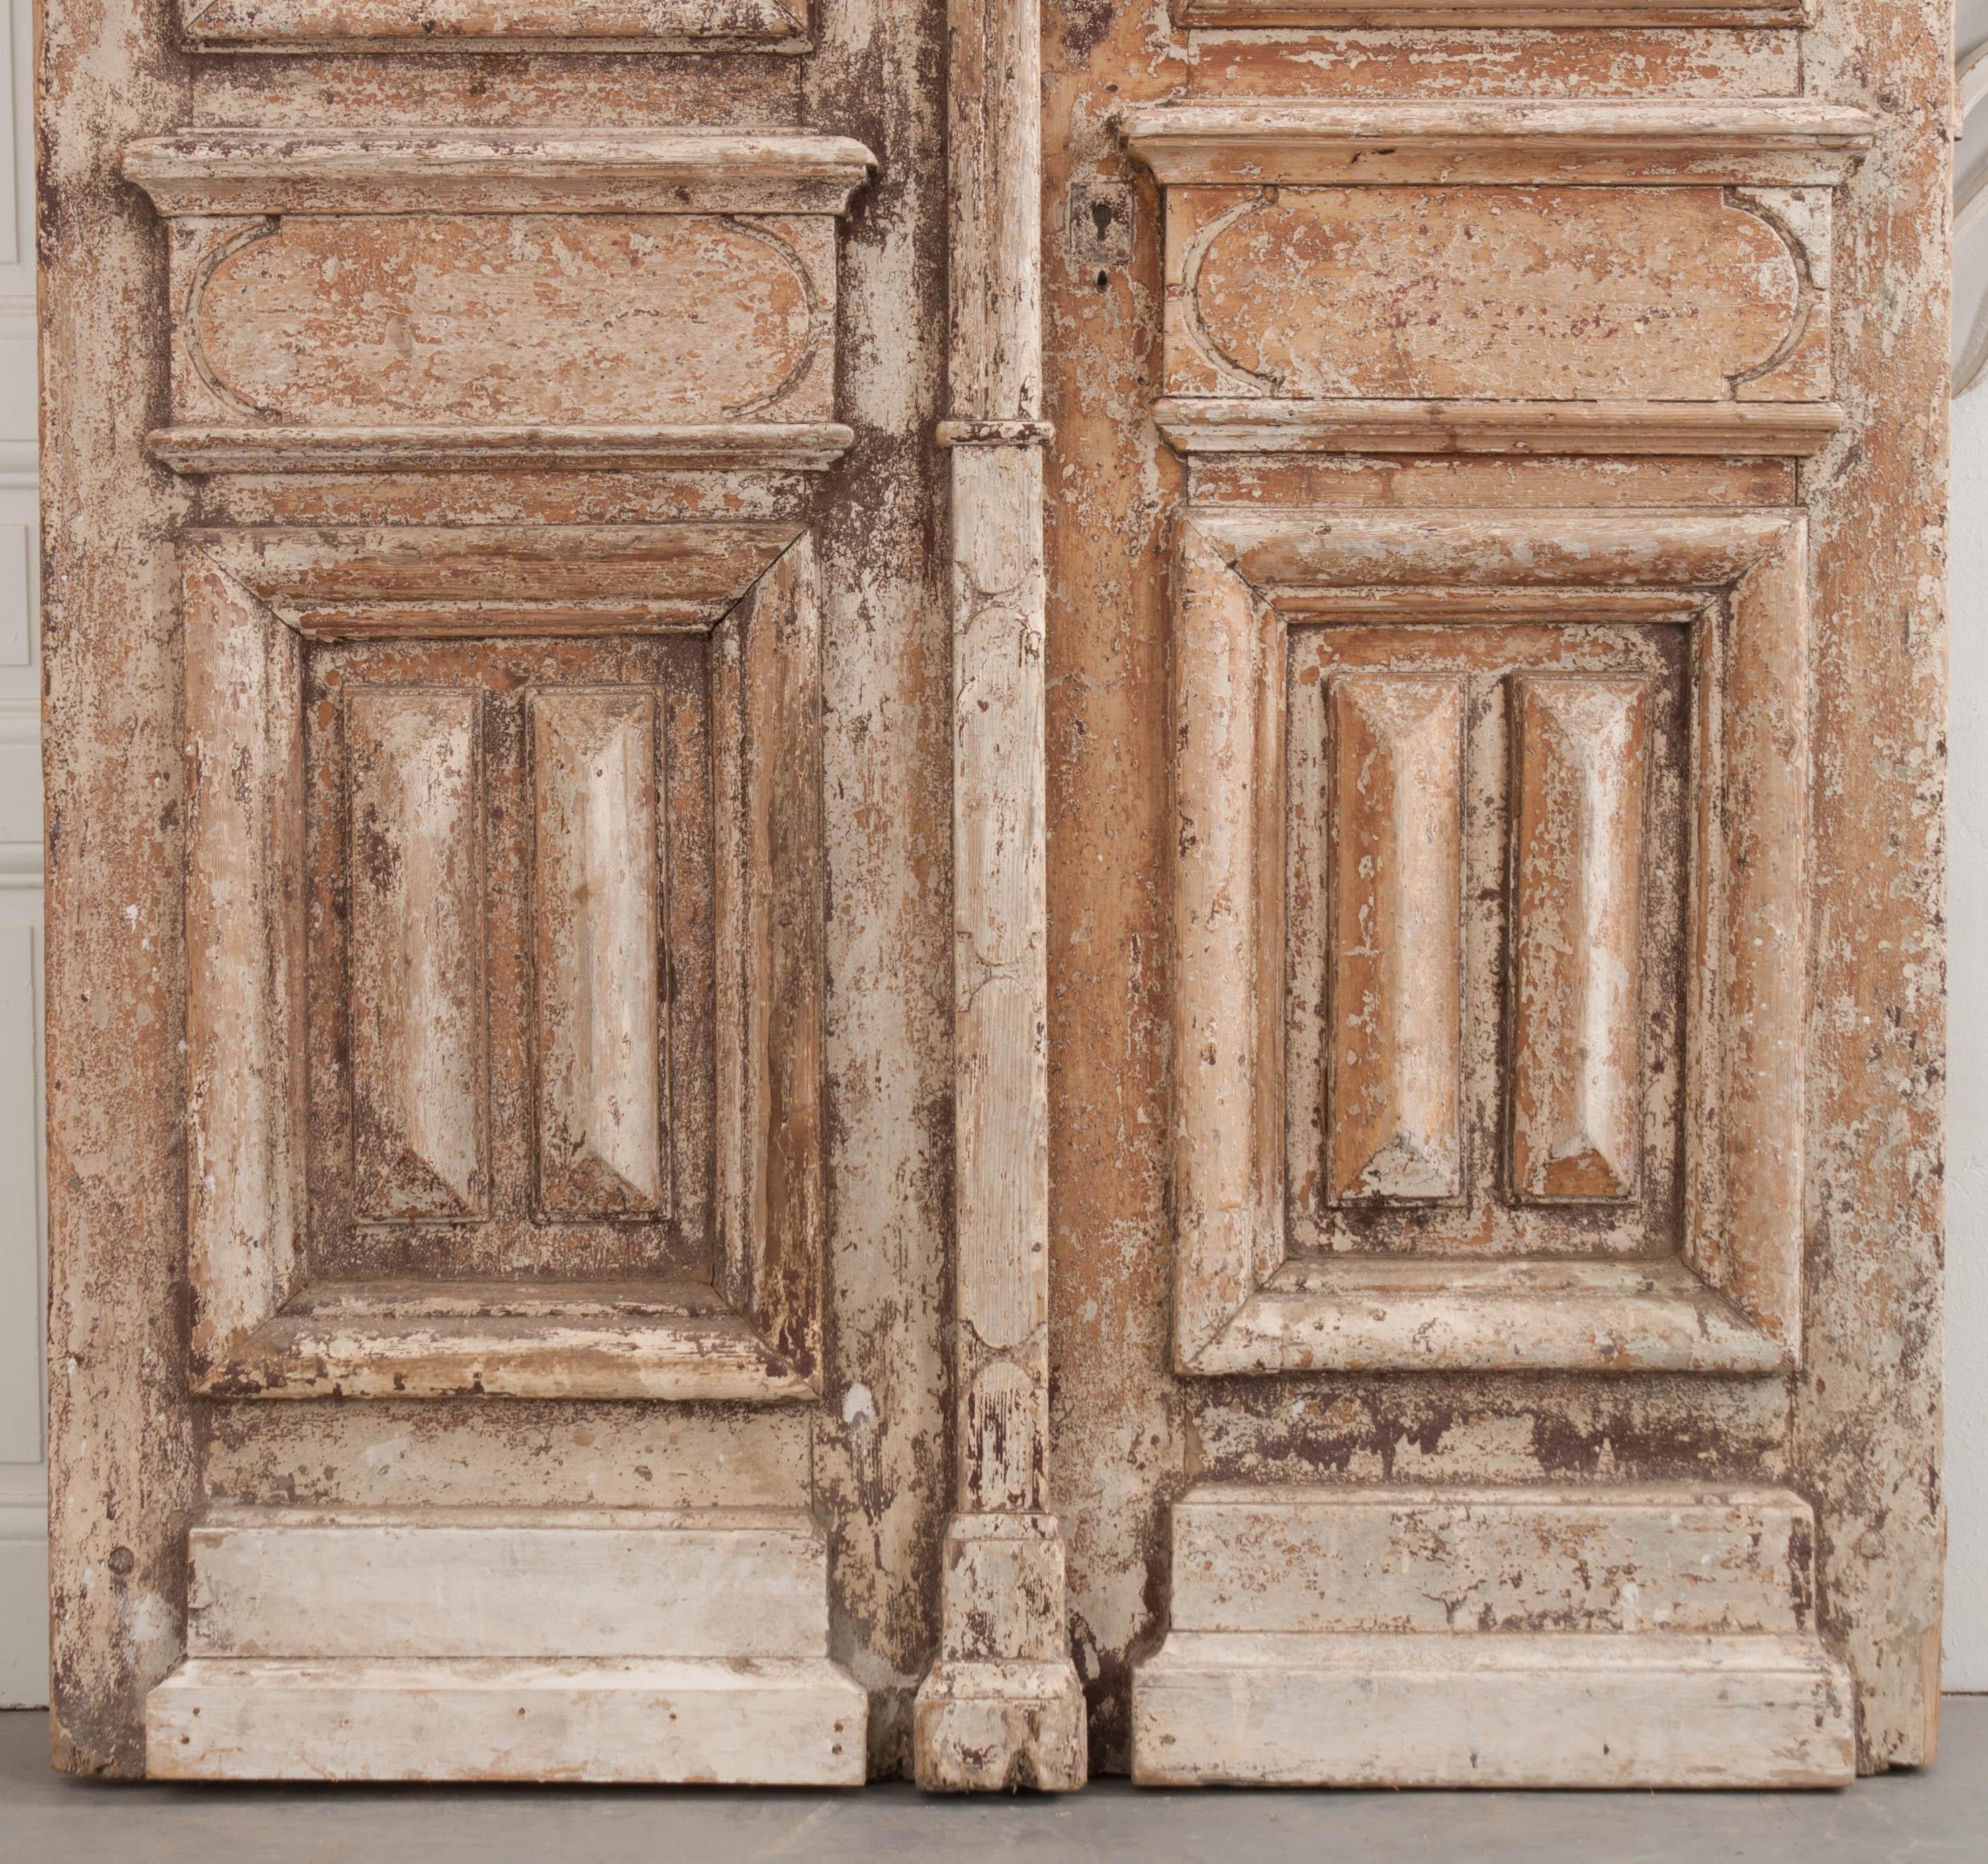 This tall and imposing pair of Napoleon III-style painted-pine and wrought iron entry doors are from France, circa 1900s, and retain the original richly patinated cream-colored paint. Each deeply carved and paneled door is outfitted with restored